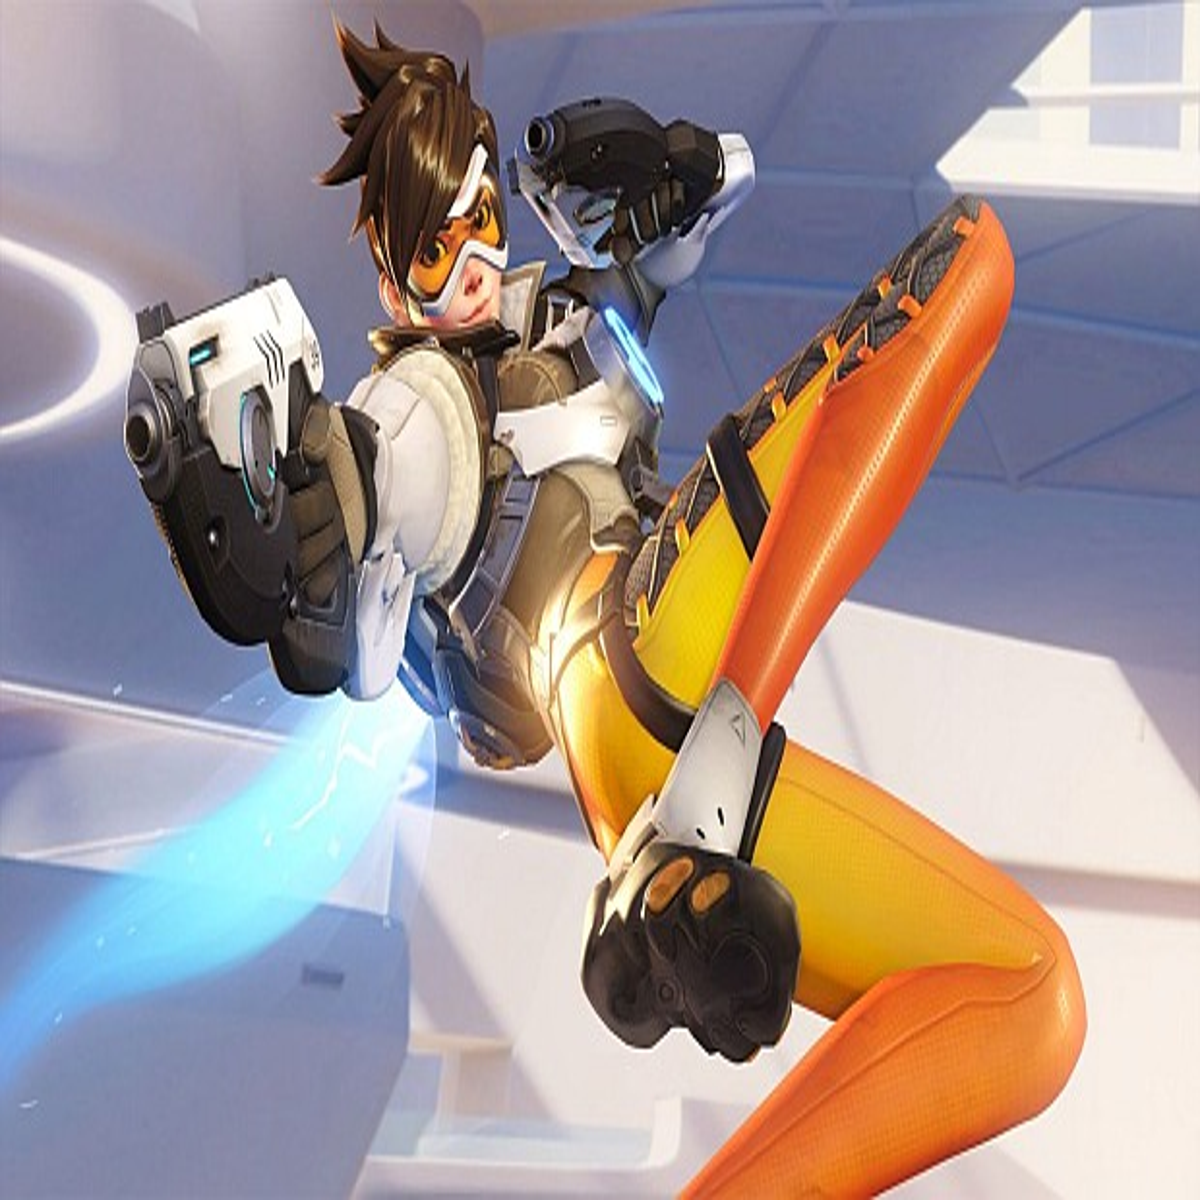 Overwatch' Tracer Comic Challenge Event is Live! Here's How to